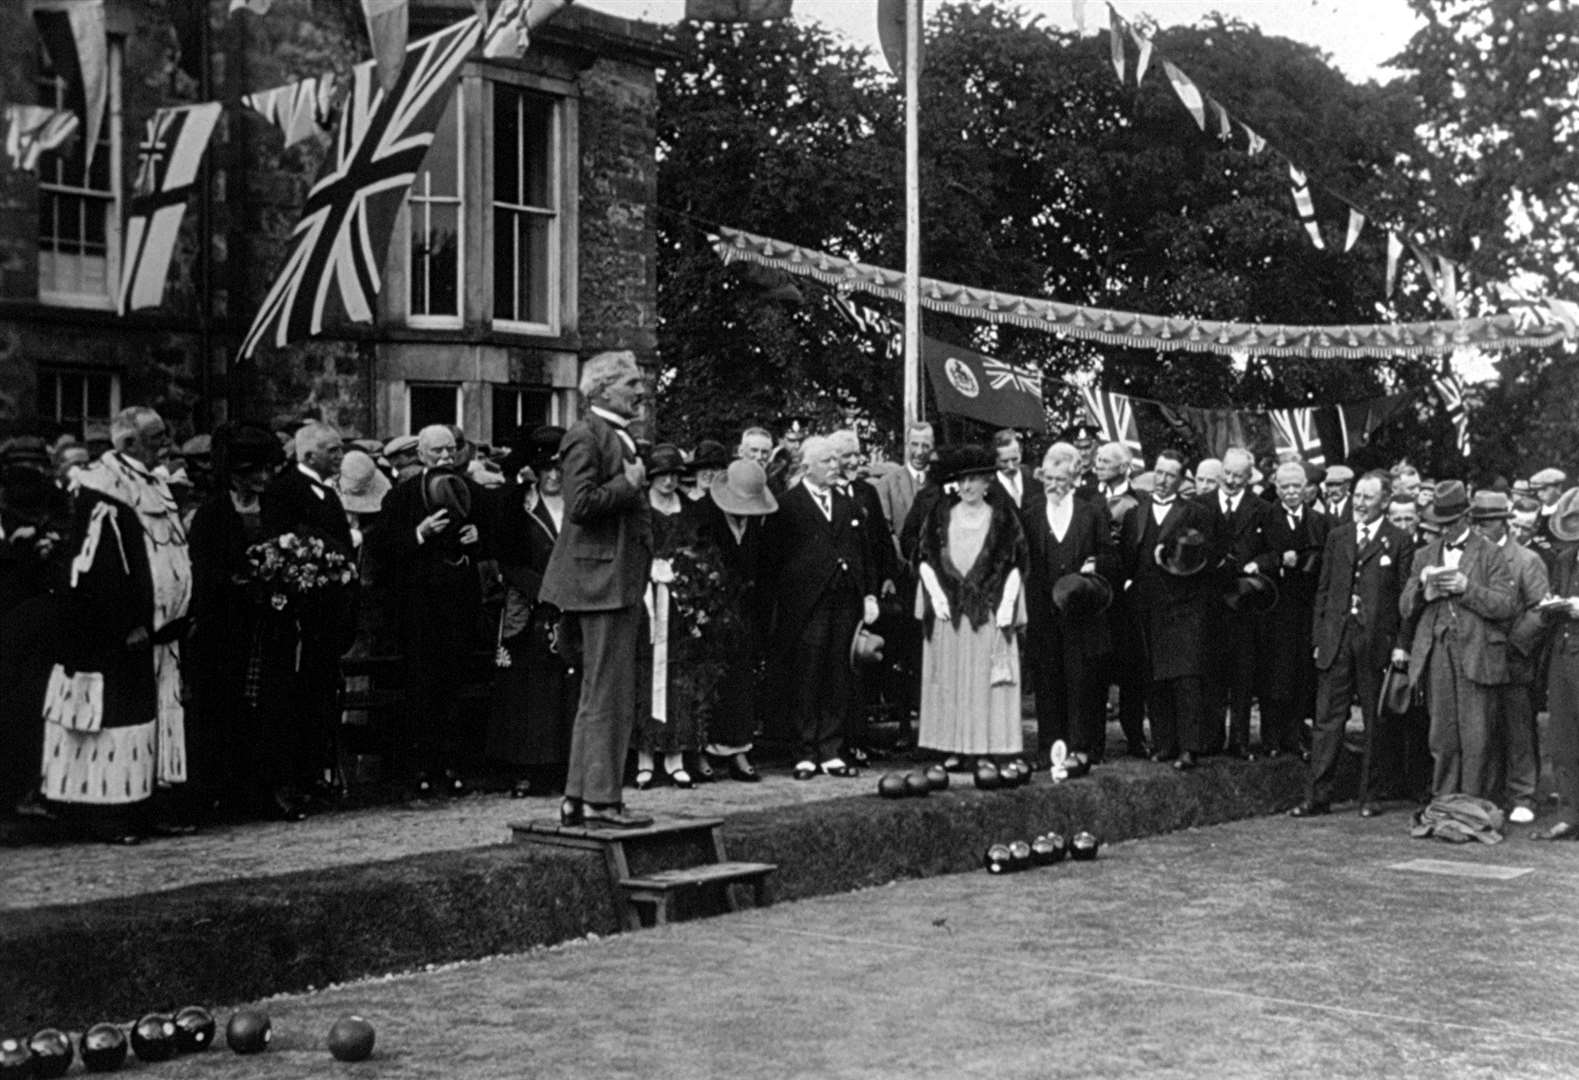 Then Prime Minister Ramsay MacDonald opening Grant Park to the public in 1924.